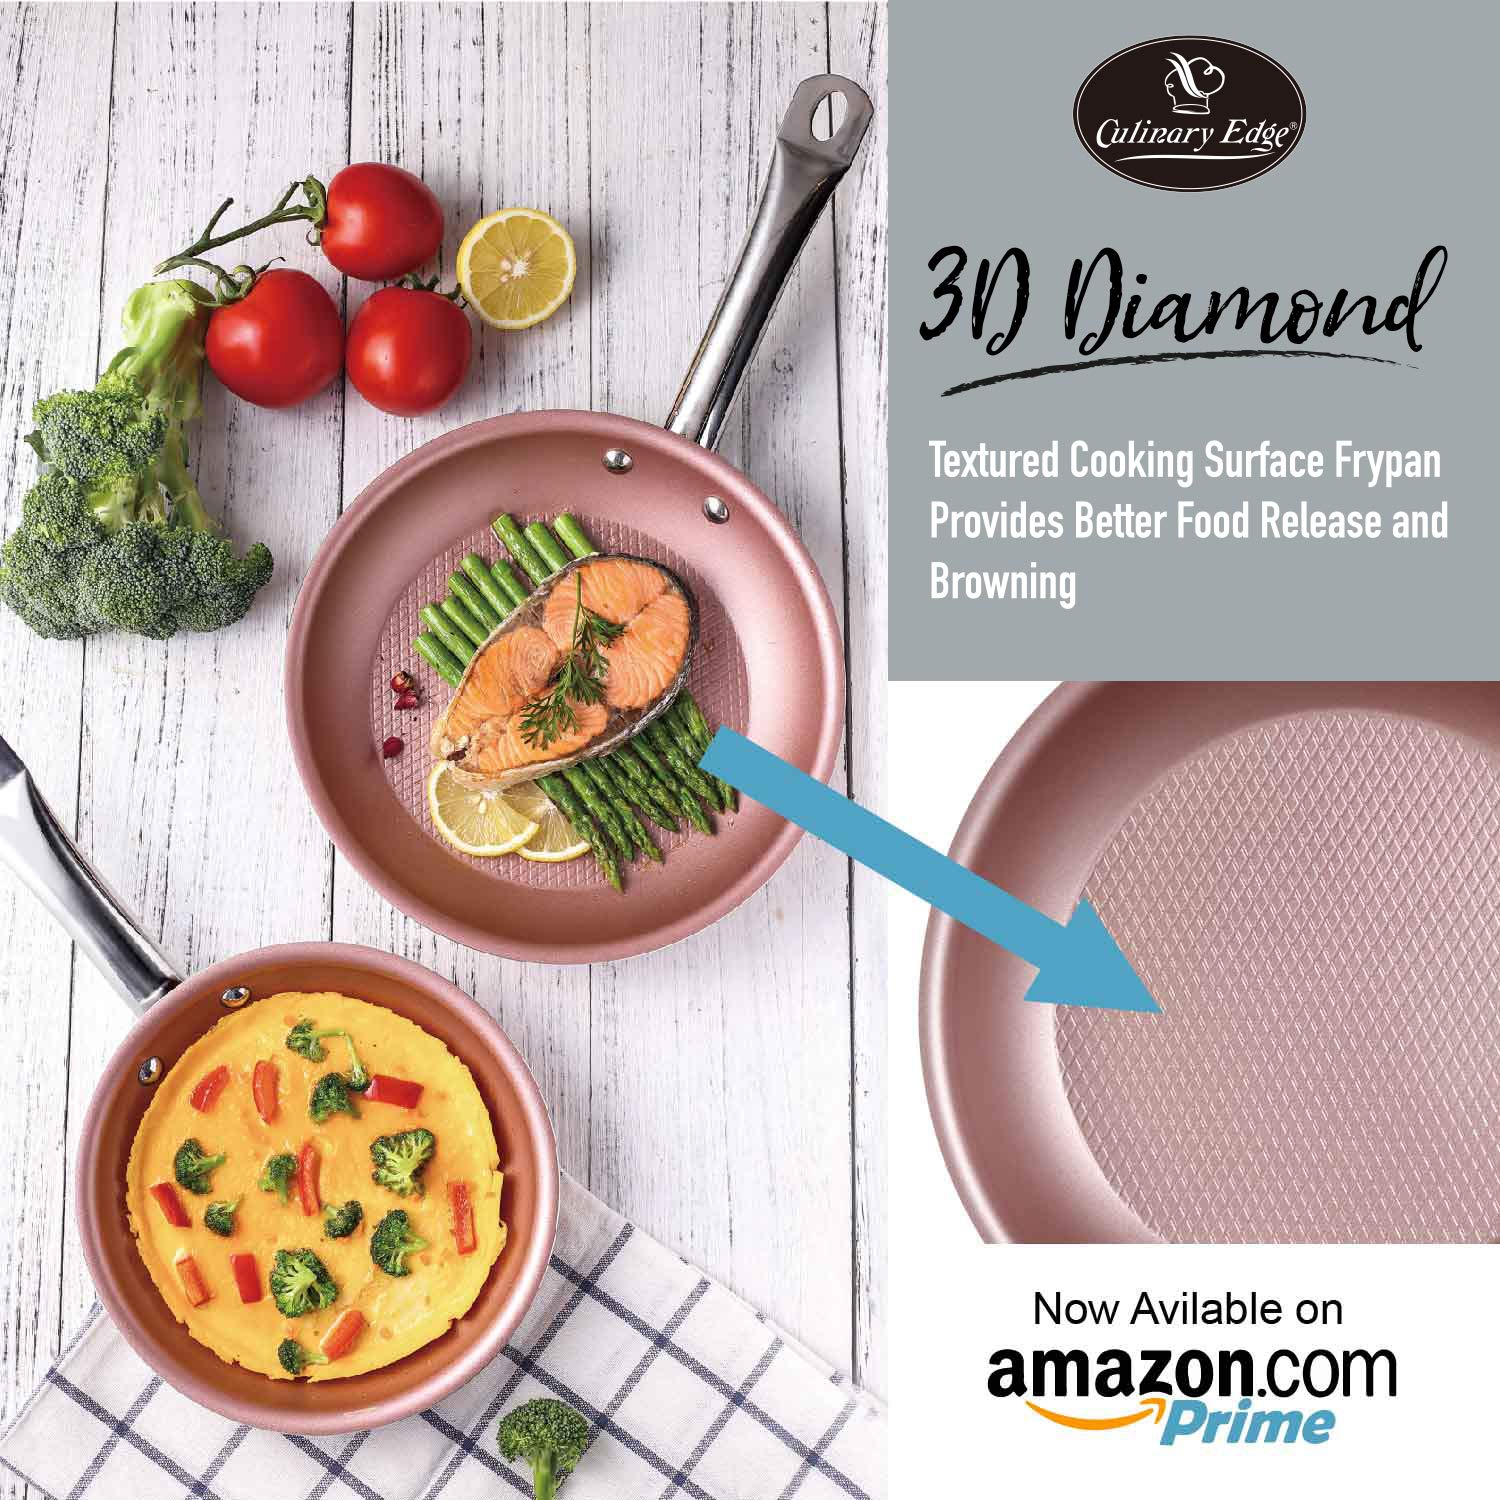 Culinary Edge 3D Diamond Textured Bottom 9.5-Inch Nonstick Oven/Dishwasher Safe Fry Pan - Rose Gold